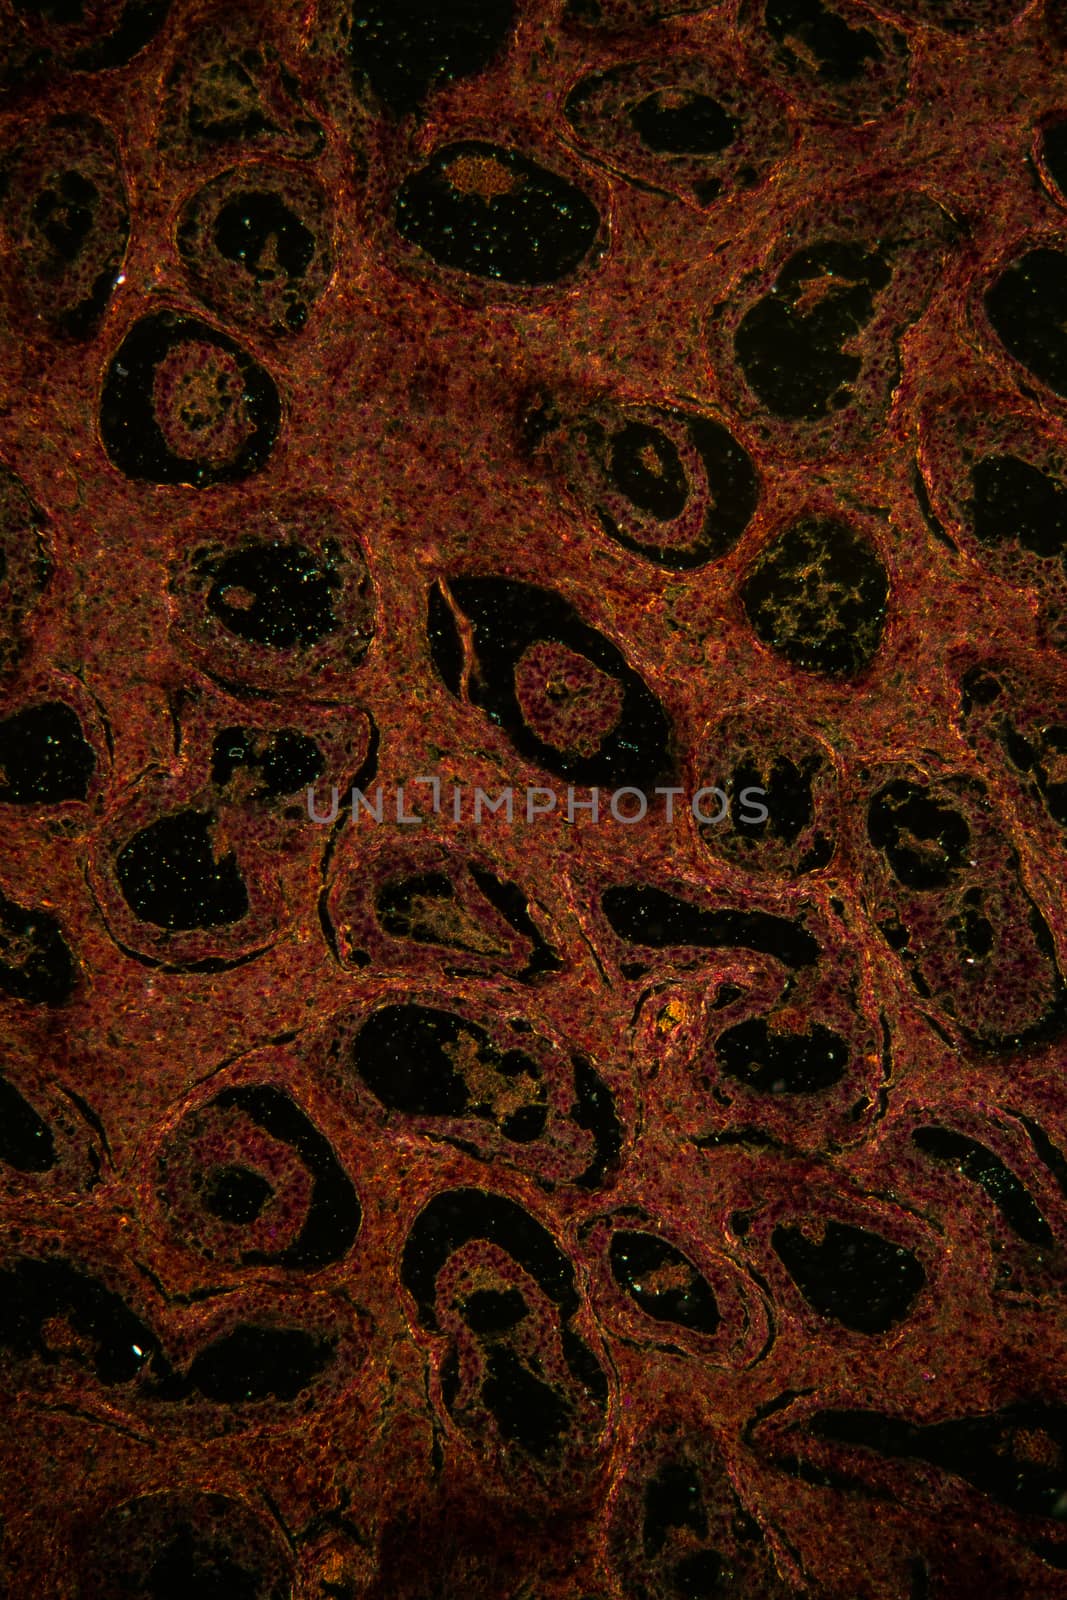 Inguinal testicle tissue under the microscope 100x by Dr-Lange